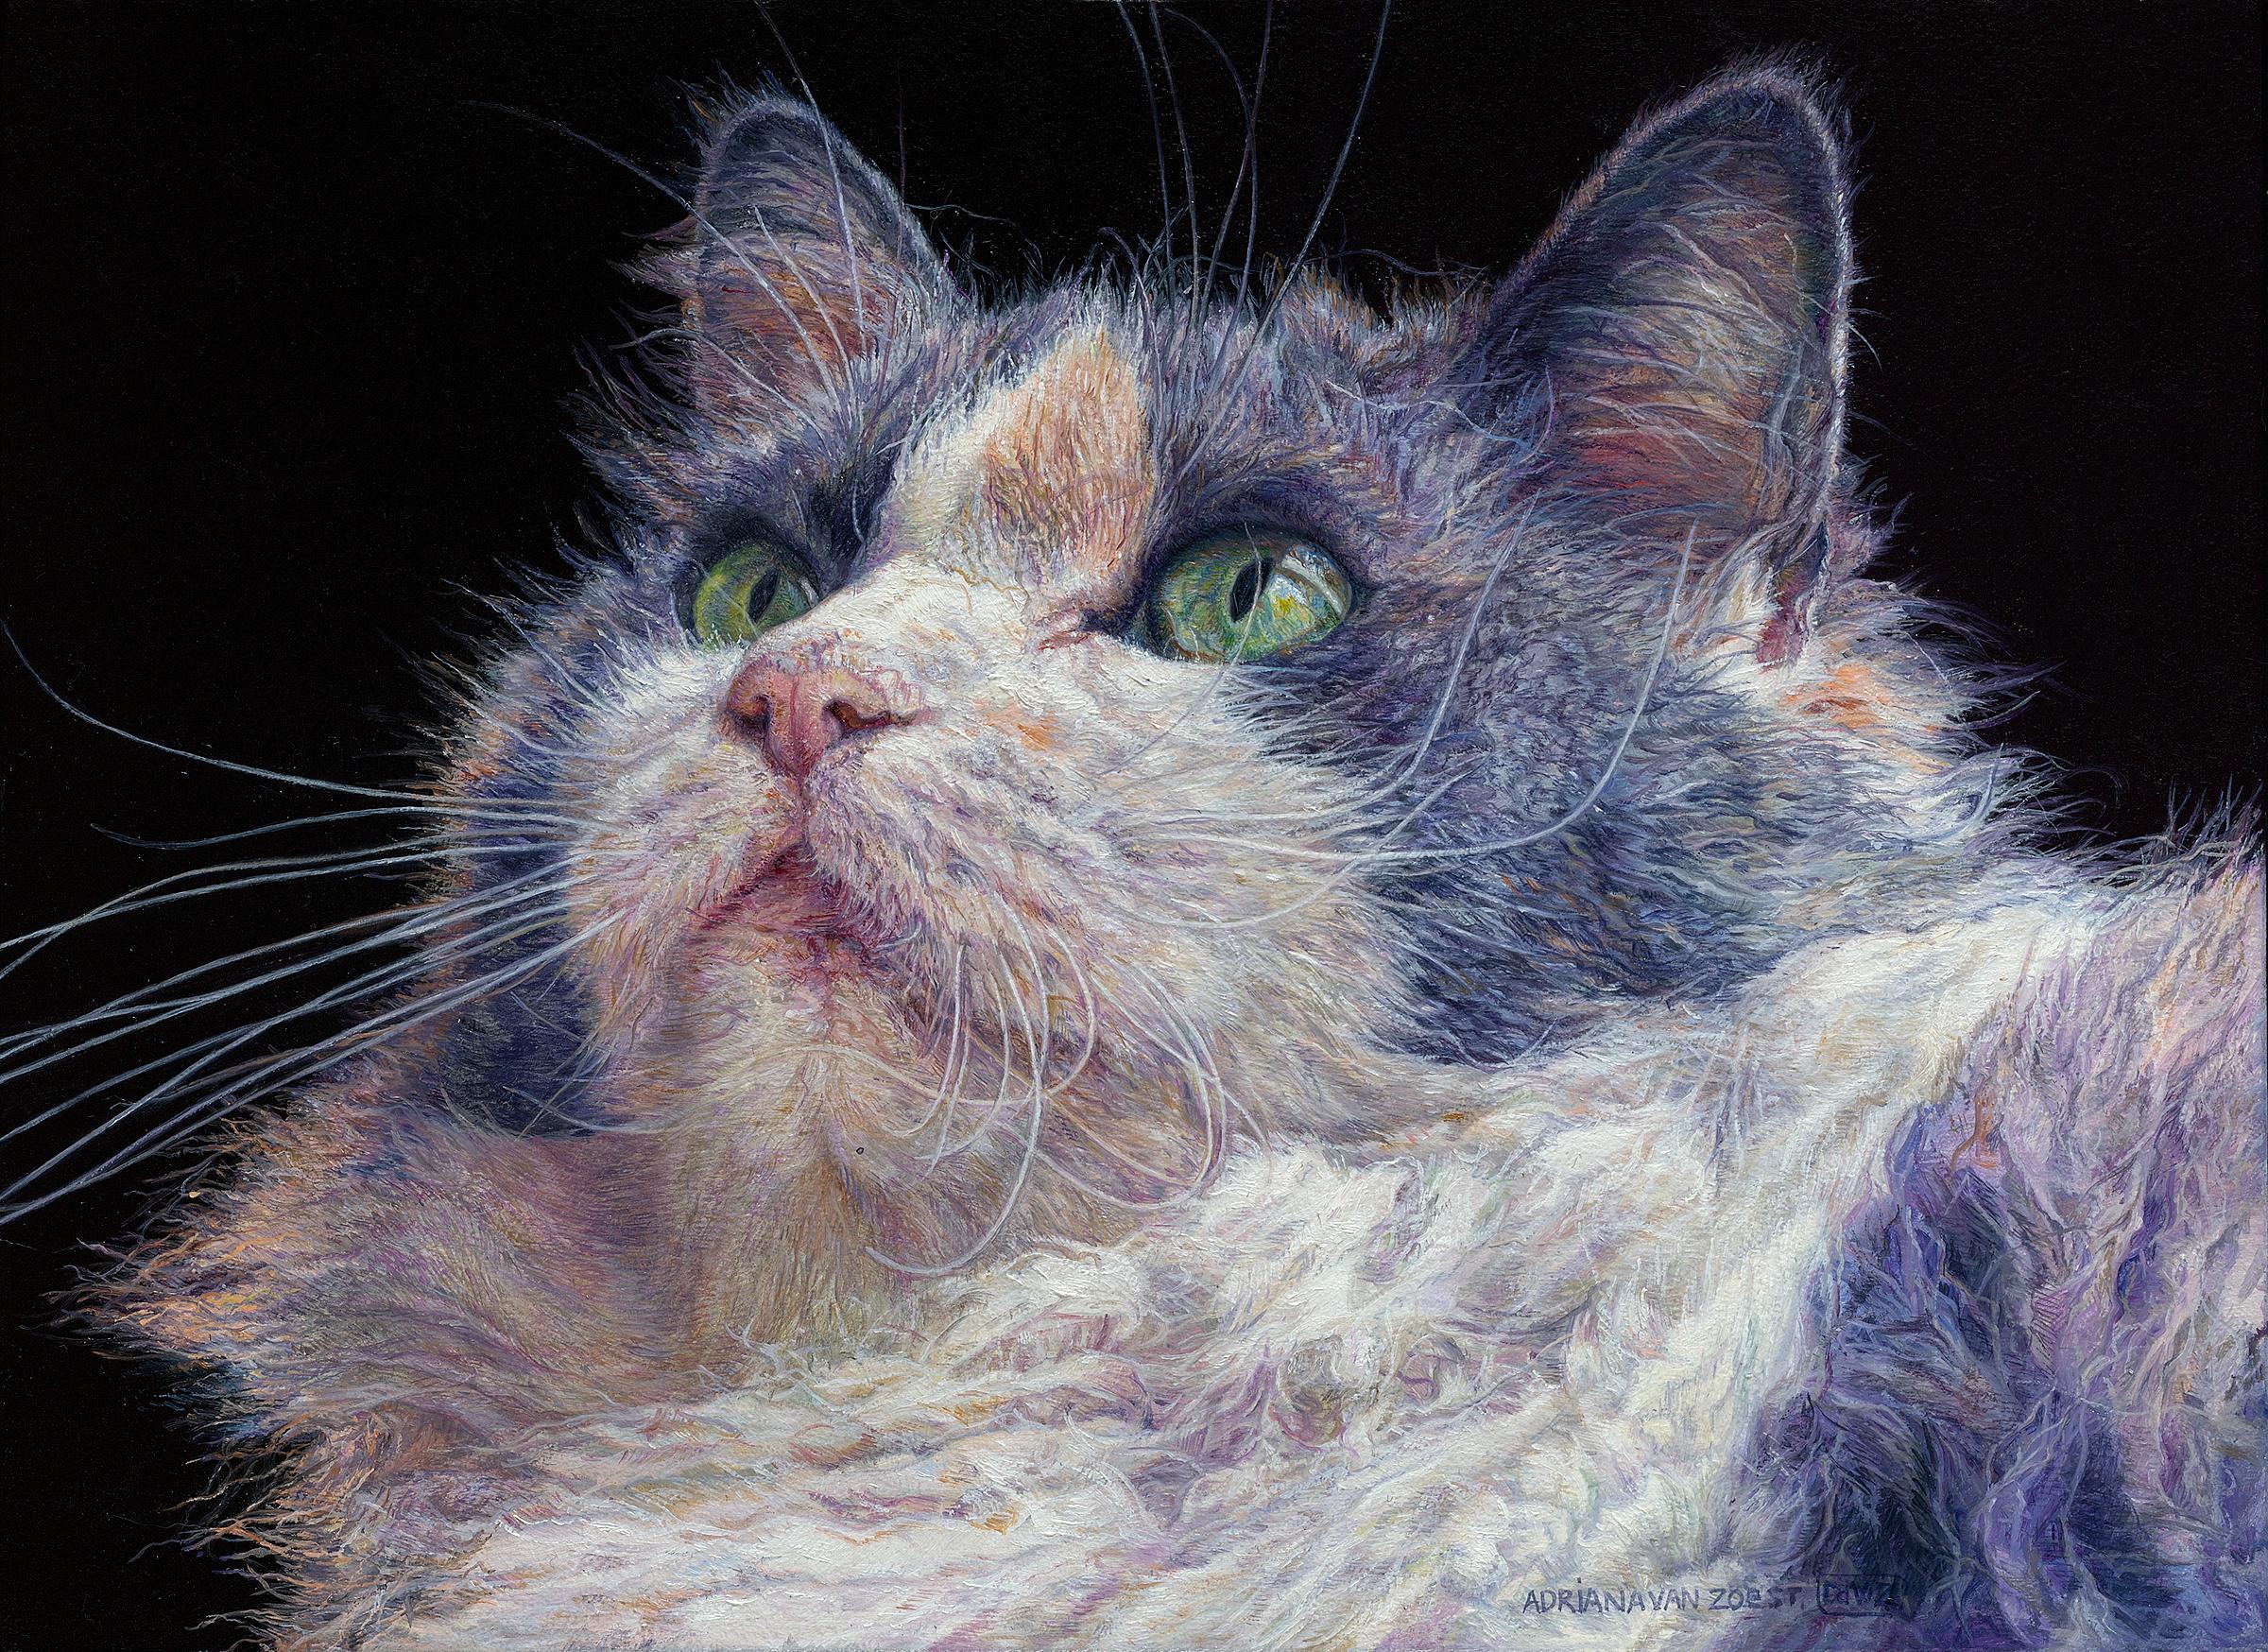 Adriana van Zoest Animal Painting - Belle II- 21st Century Contemporary Dutch Portraitpainting of a cat